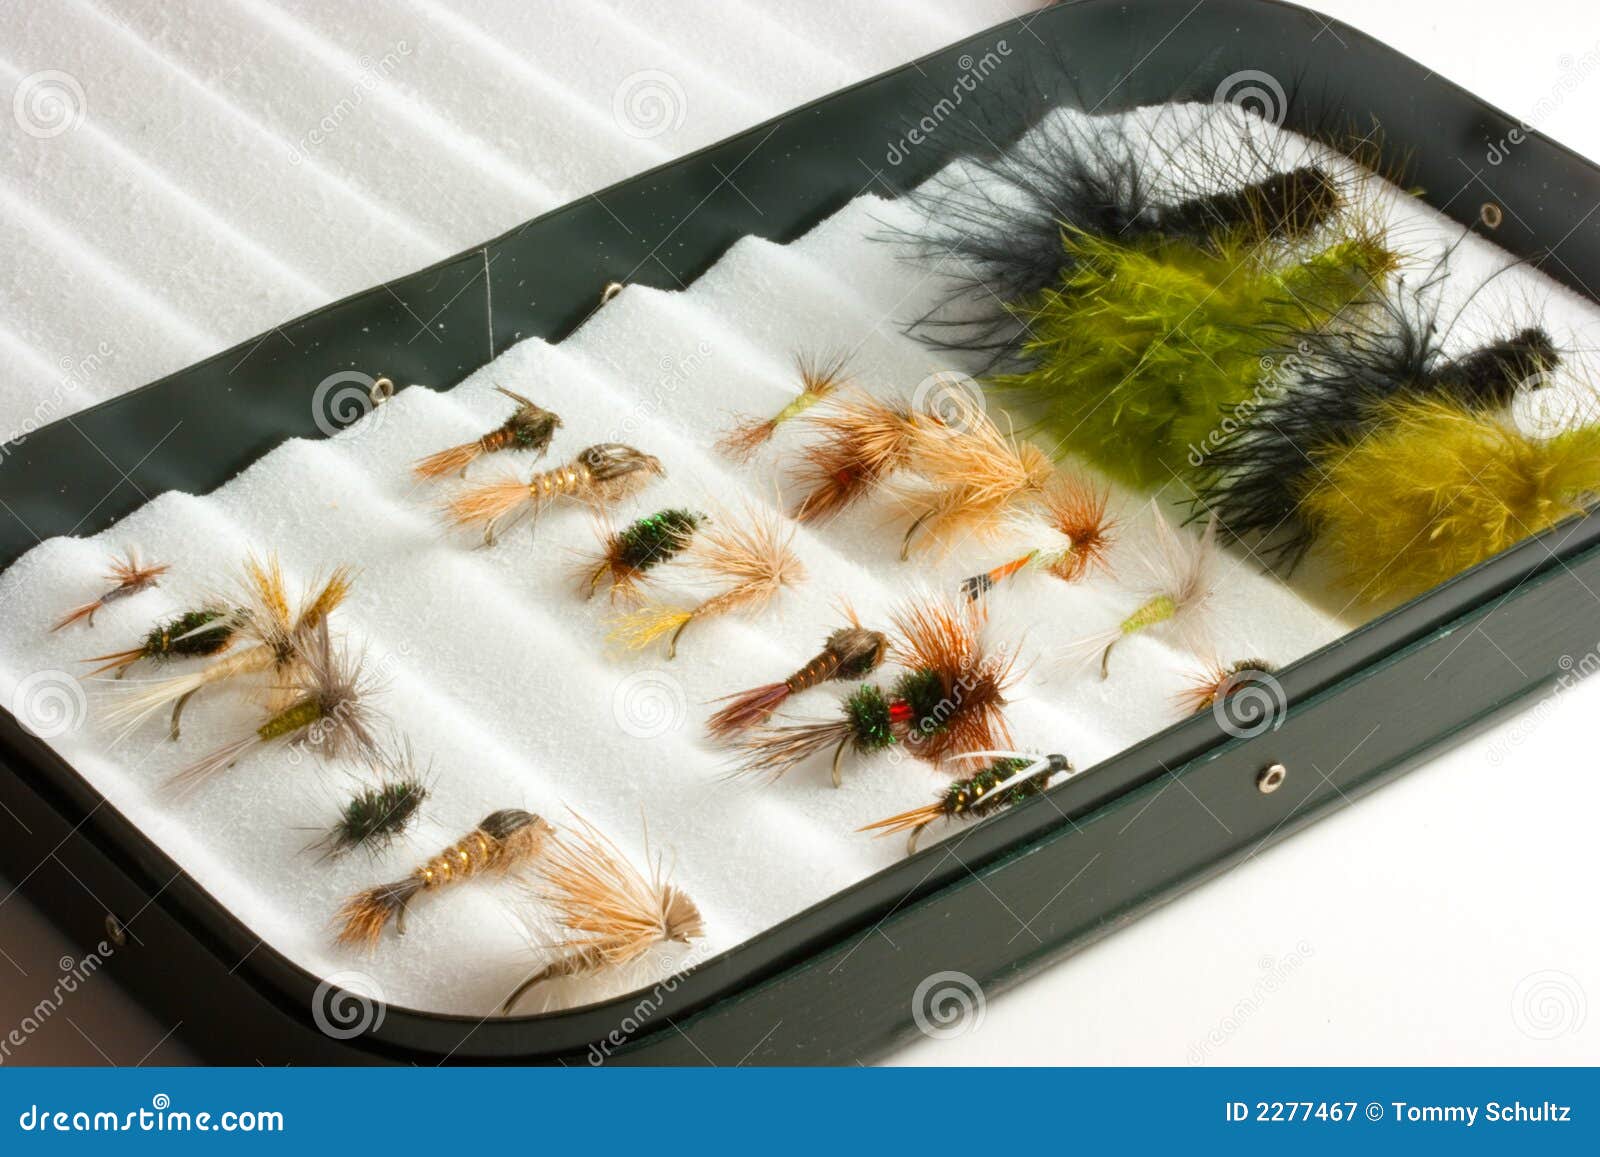 Trout lures in fly box stock image. Image of dries, exclusive - 2277467